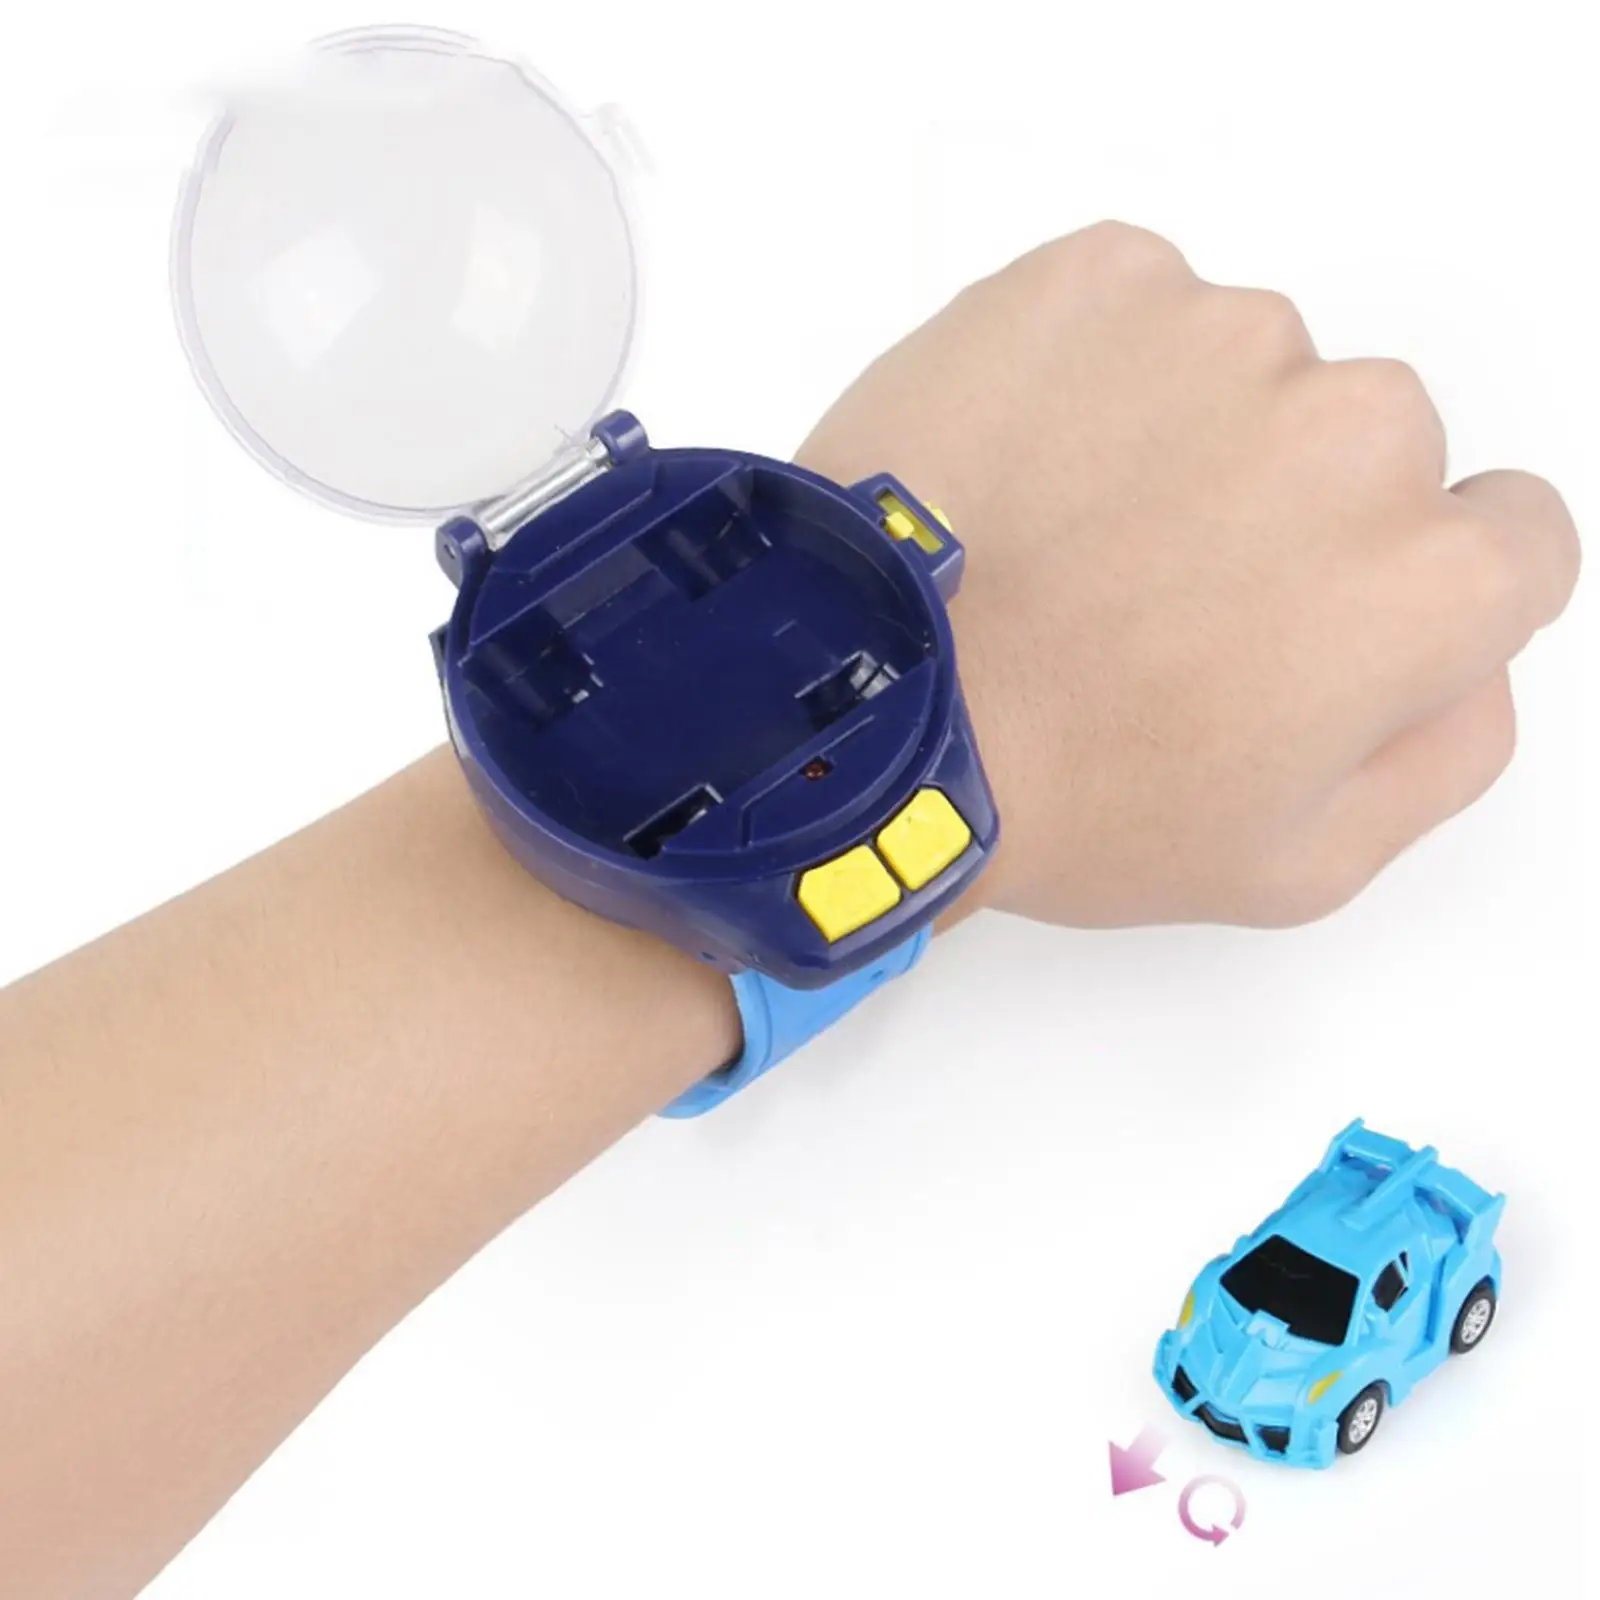 Cute Toy Children`s Watch Remote Control Toy Car Model Toy Car Birthday Present Watch Modeling Ingenious Toy